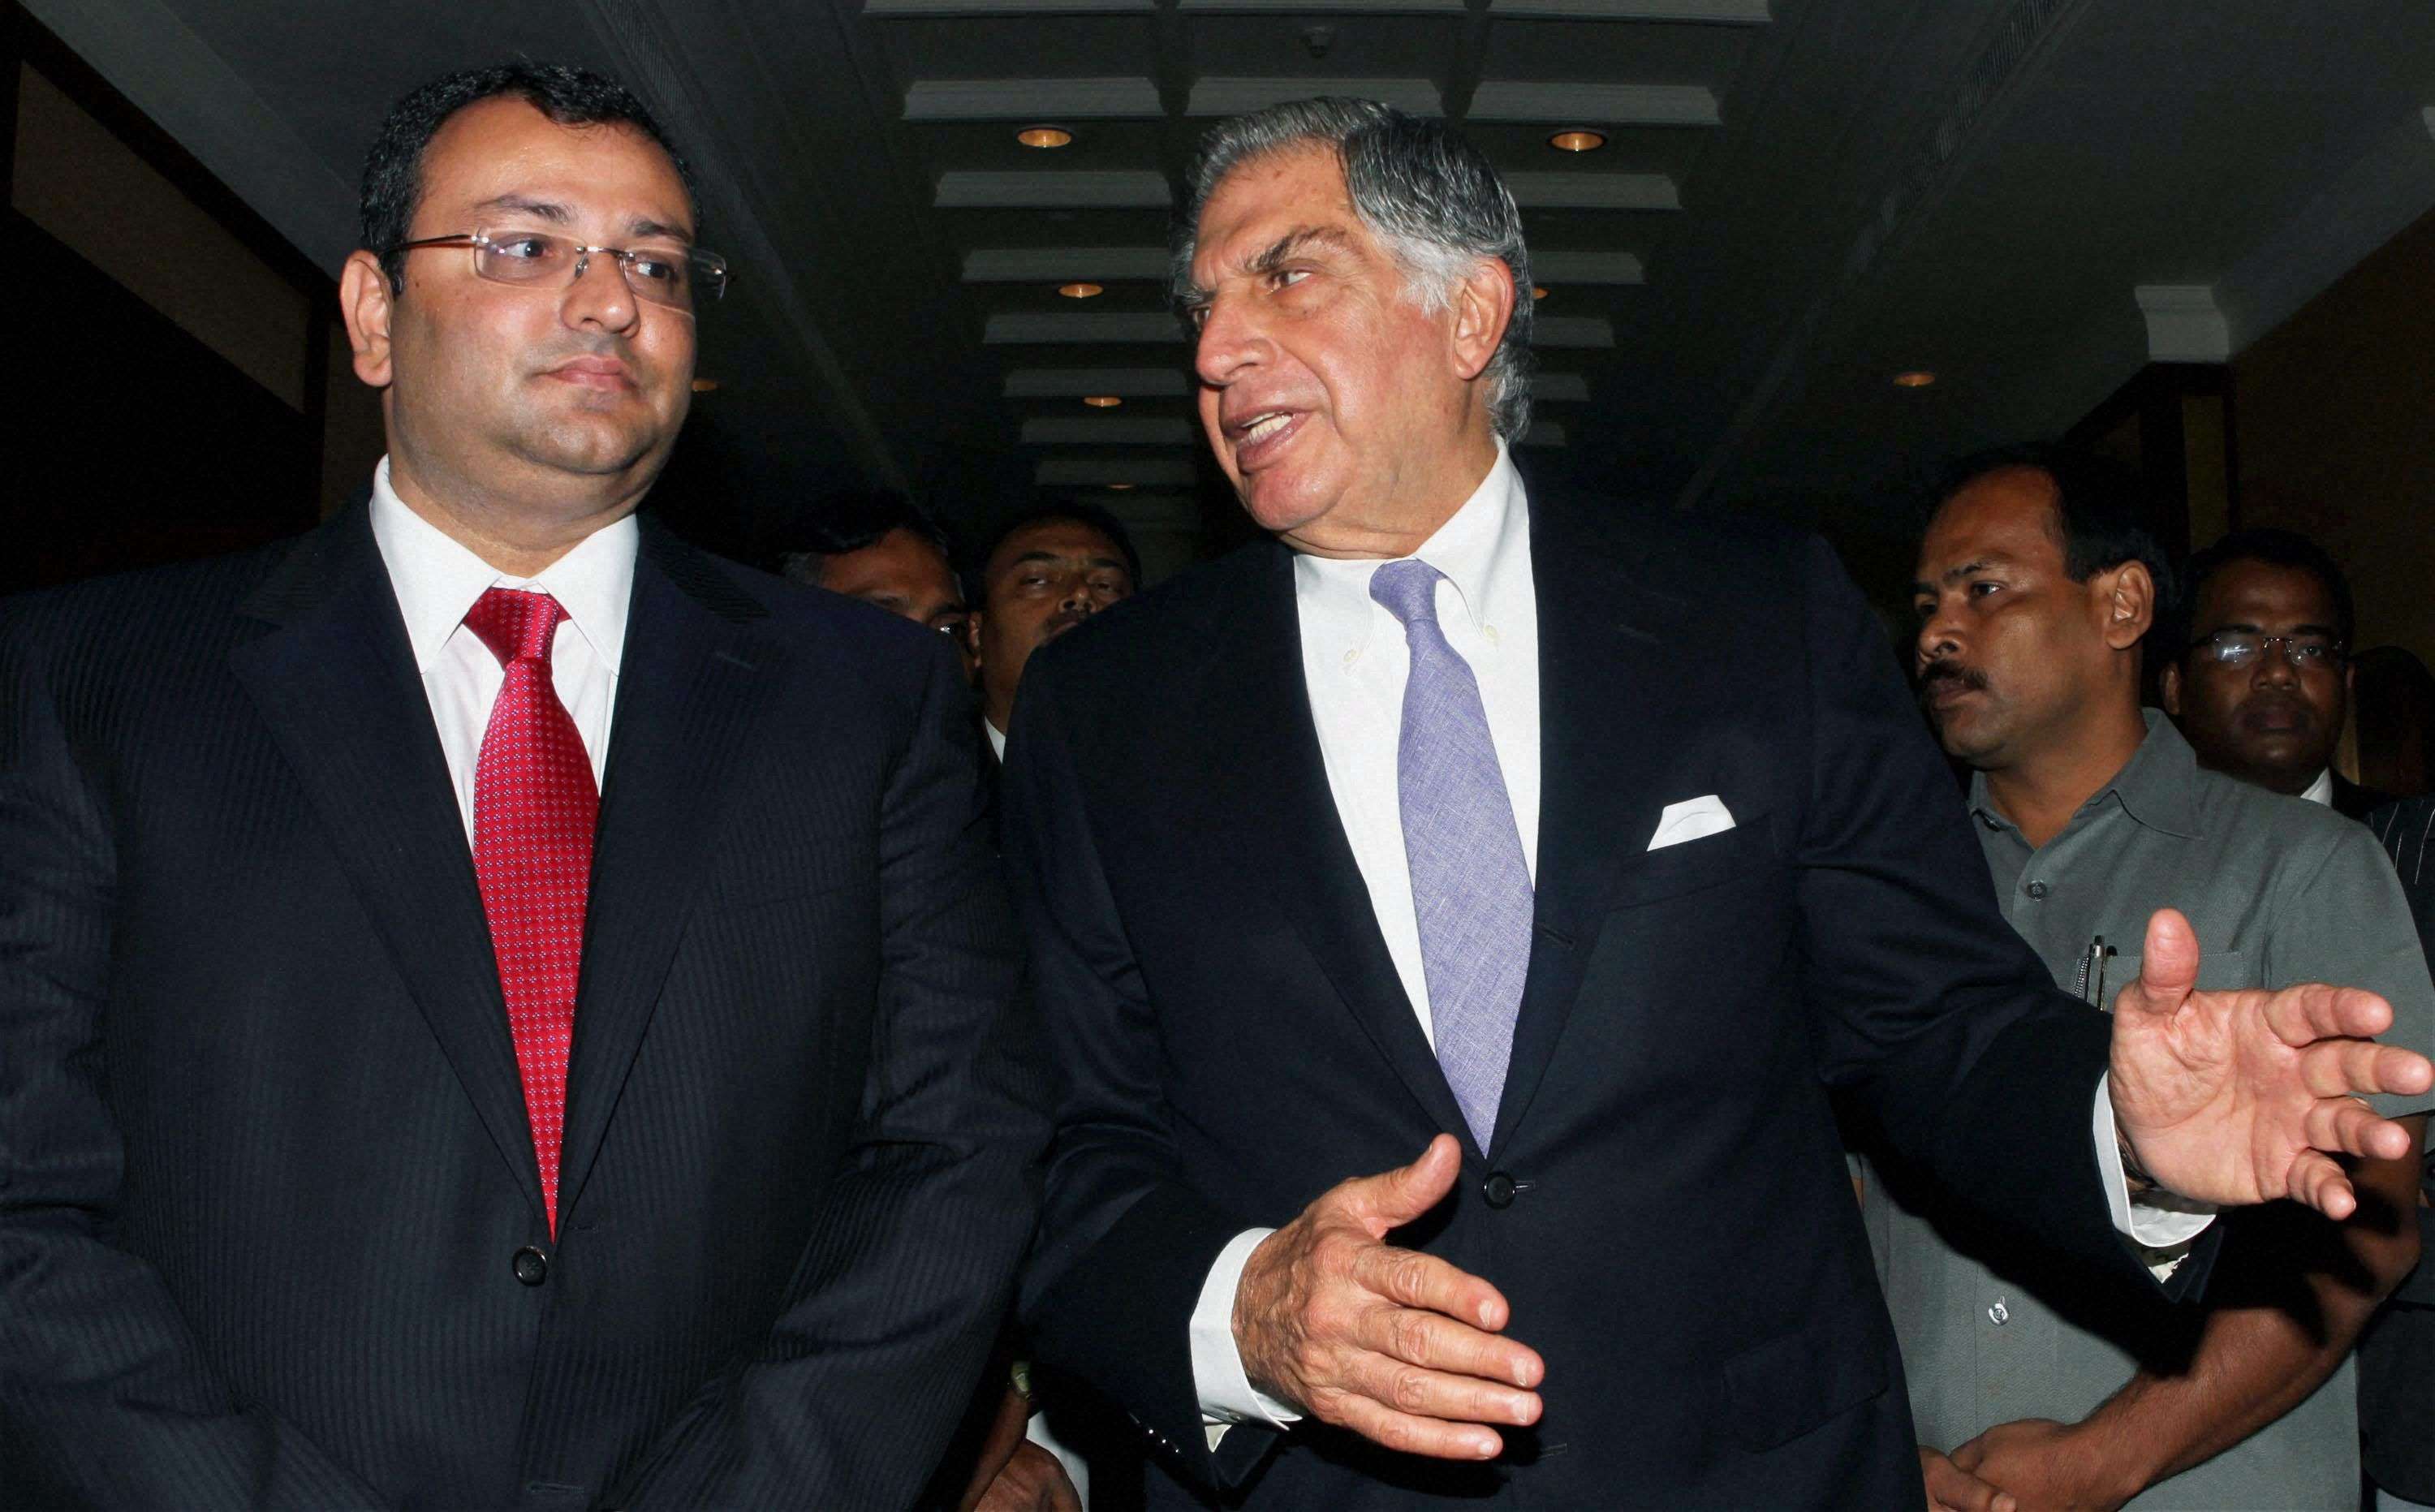 New Delhi: **FILE** File photo of Ratan Tata (L) with Cyrus Mistry. Tata Sons on Monday removed Cyrus Mistry as its Chairman, nearly four years after he took over the reins of the group. Ratan Tata makes a comeback, taking over as the company's interim boss for 4 months. PTI Photo (STORY DEL66)(PTI10_24_2016_000163B)